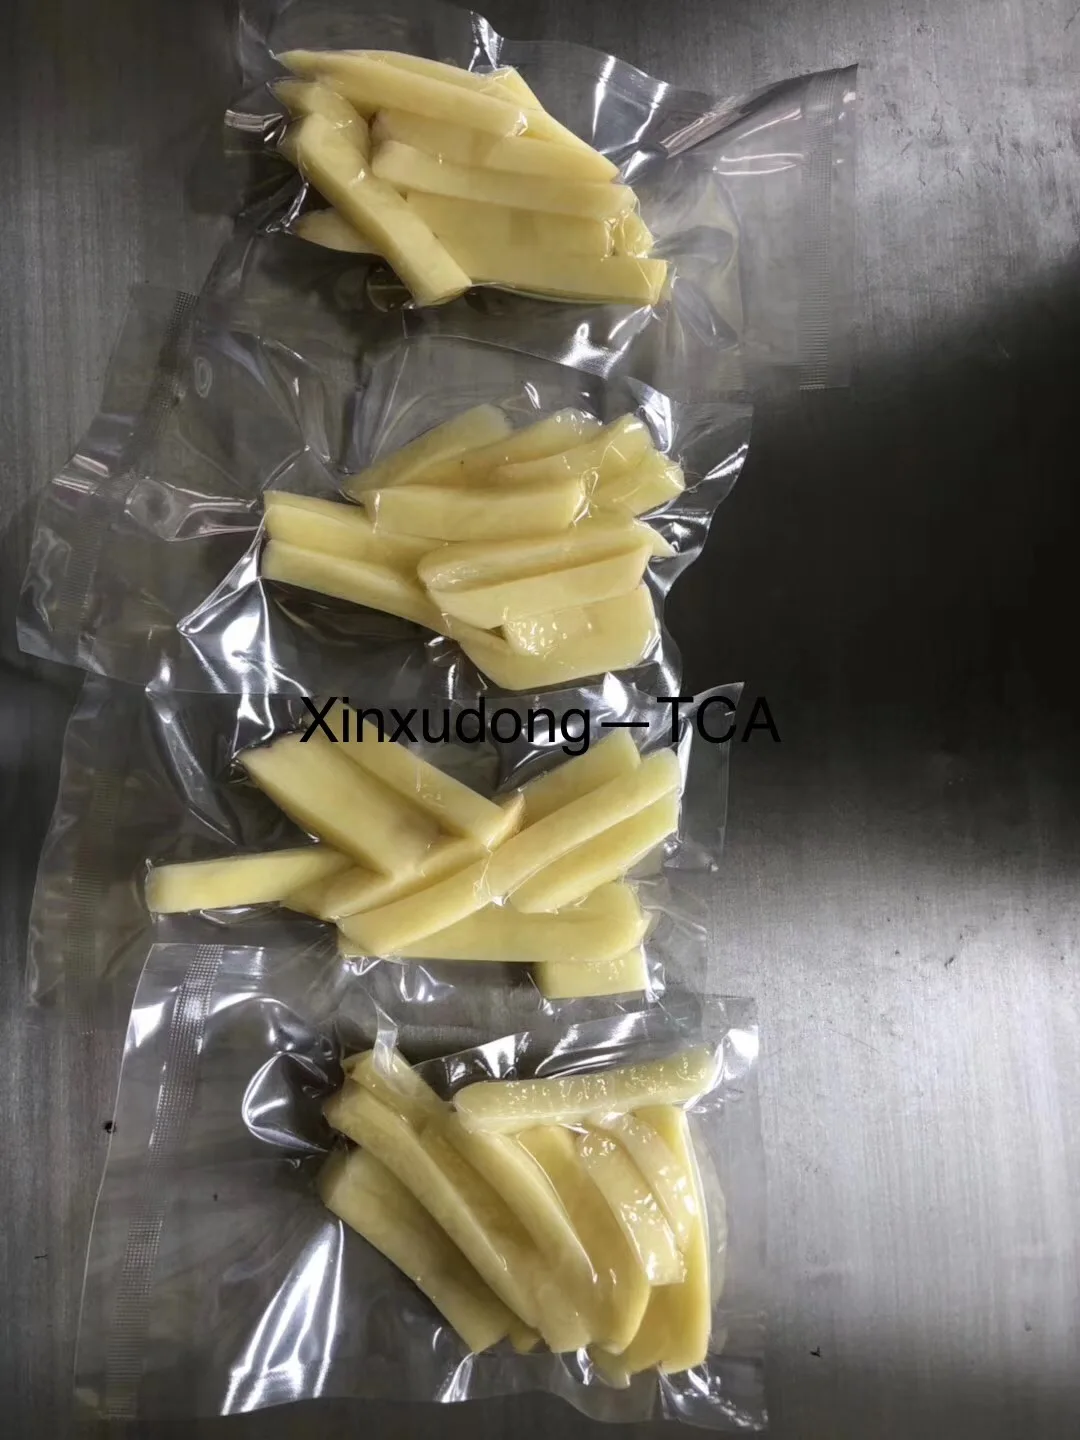 
Fully automatic and semi-automatic frozen potato fries production line 